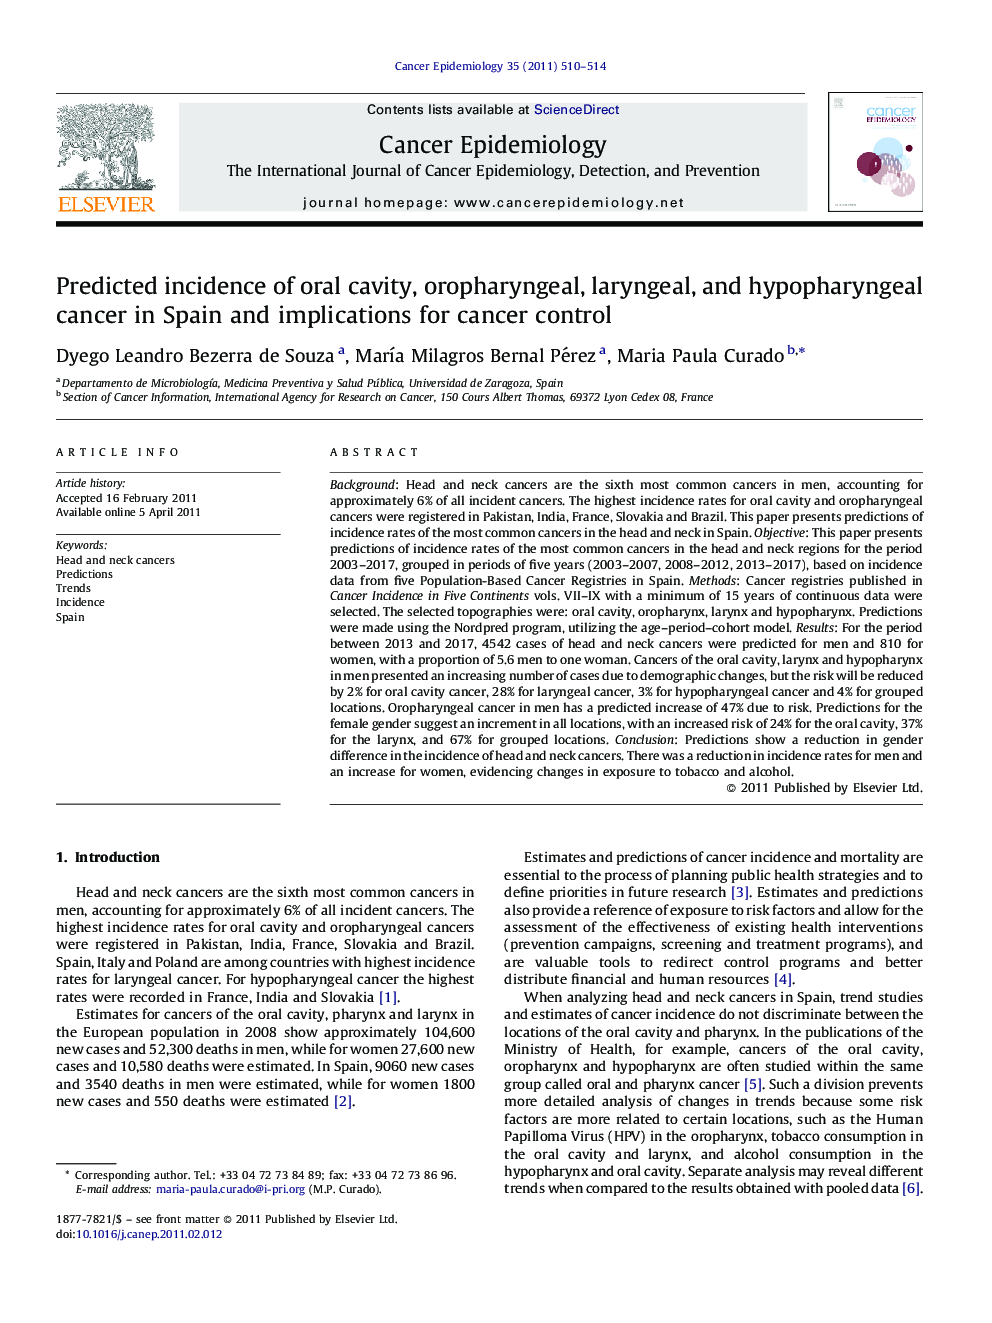 Predicted incidence of oral cavity, oropharyngeal, laryngeal, and hypopharyngeal cancer in Spain and implications for cancer control